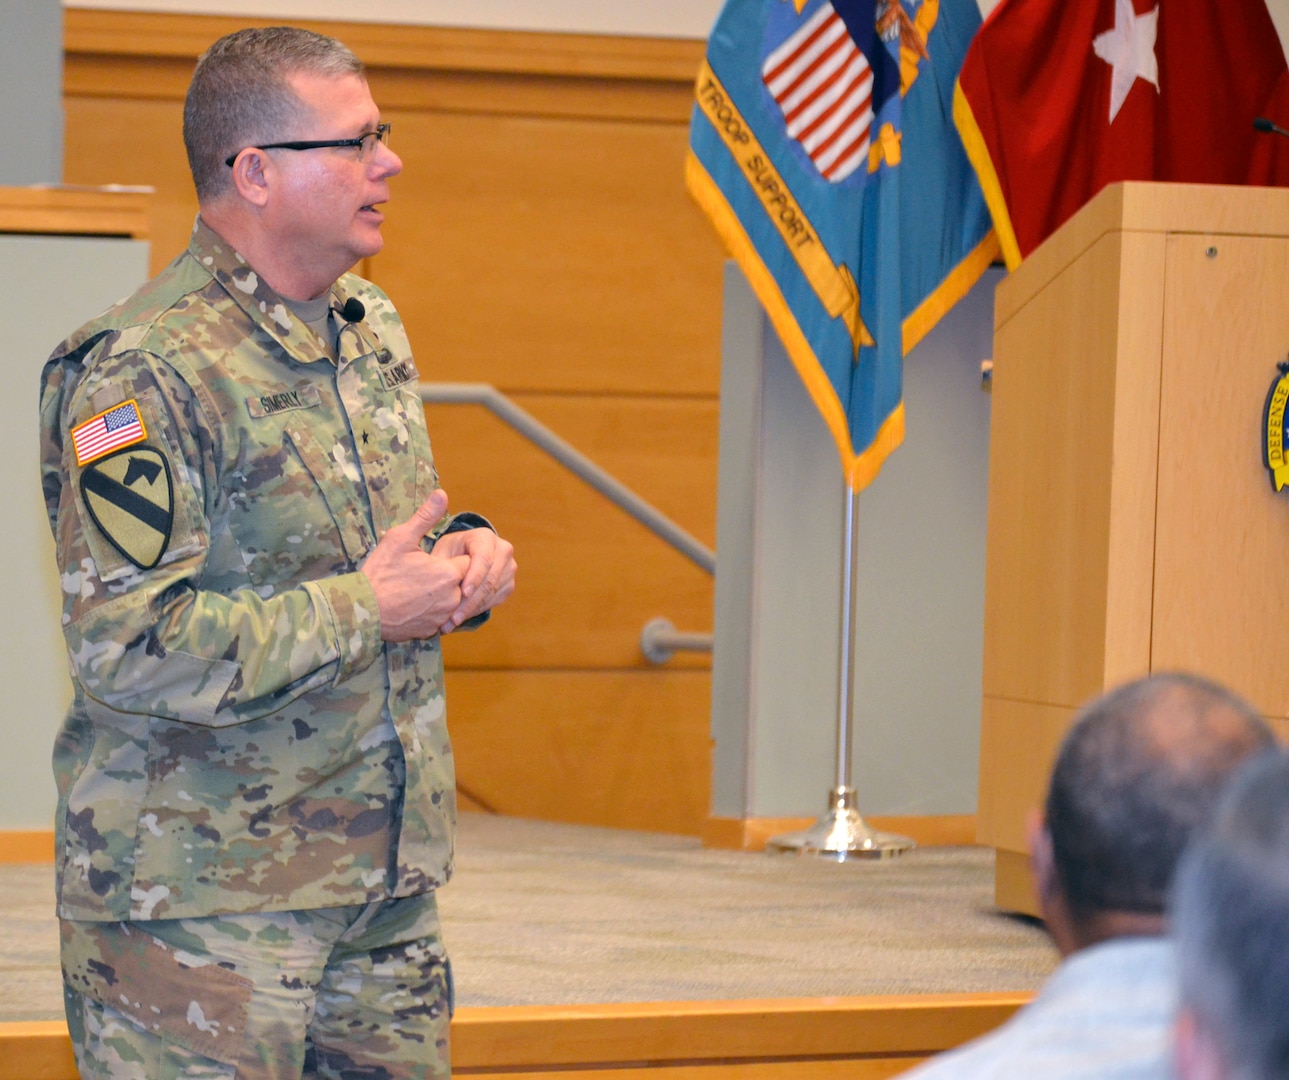 Army Brig. Gen. Mark Simerly, DLA Troop Support commander, speaks to new Pathways to Career Excellence employees during a town hall at DLA Troop Support March 4, 2019 in Philadelphia.